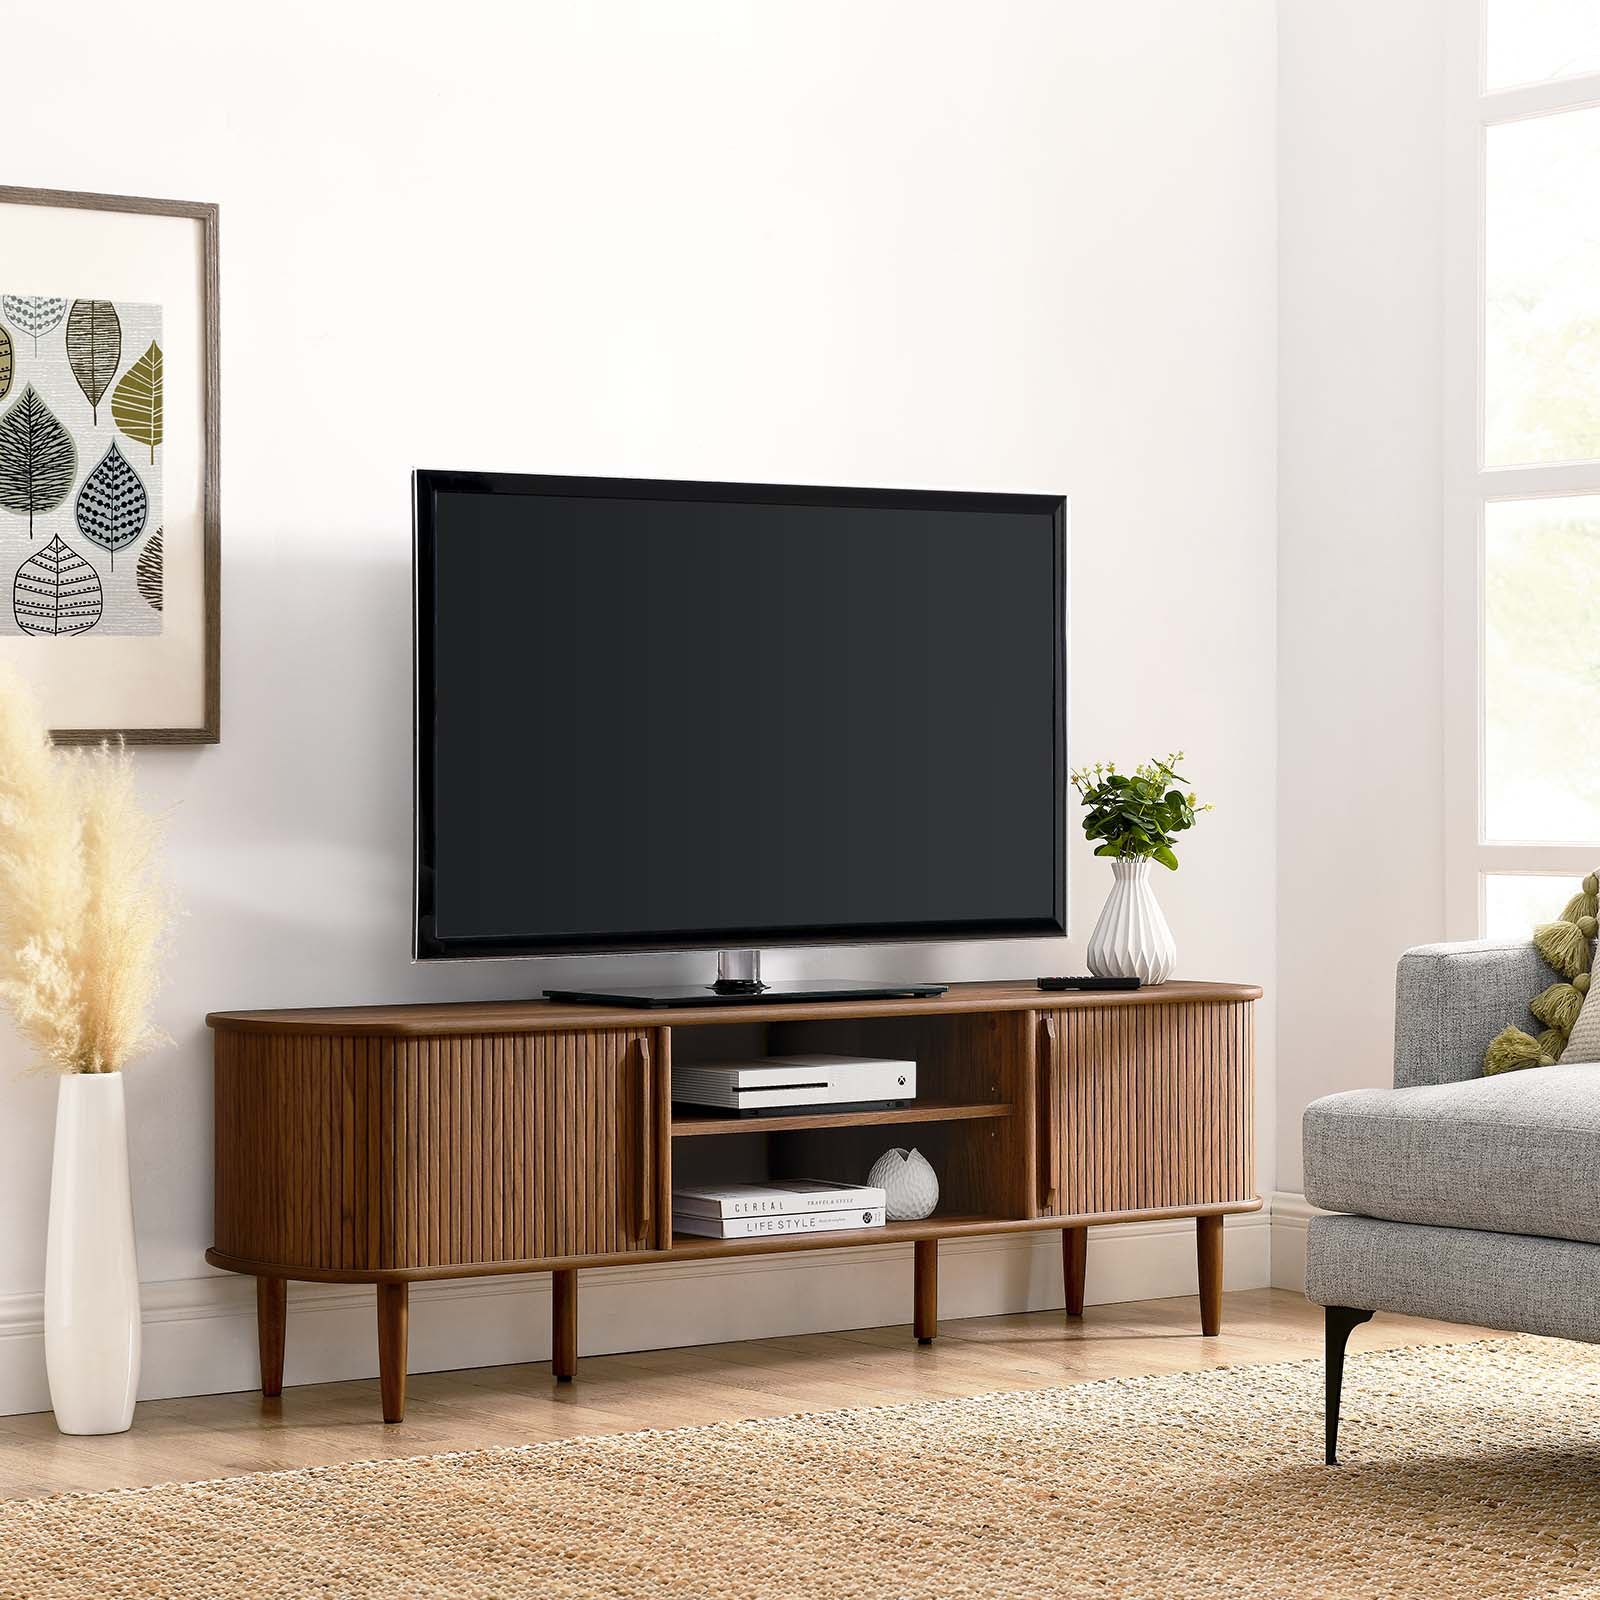 Contour 63" Wood TV Stand